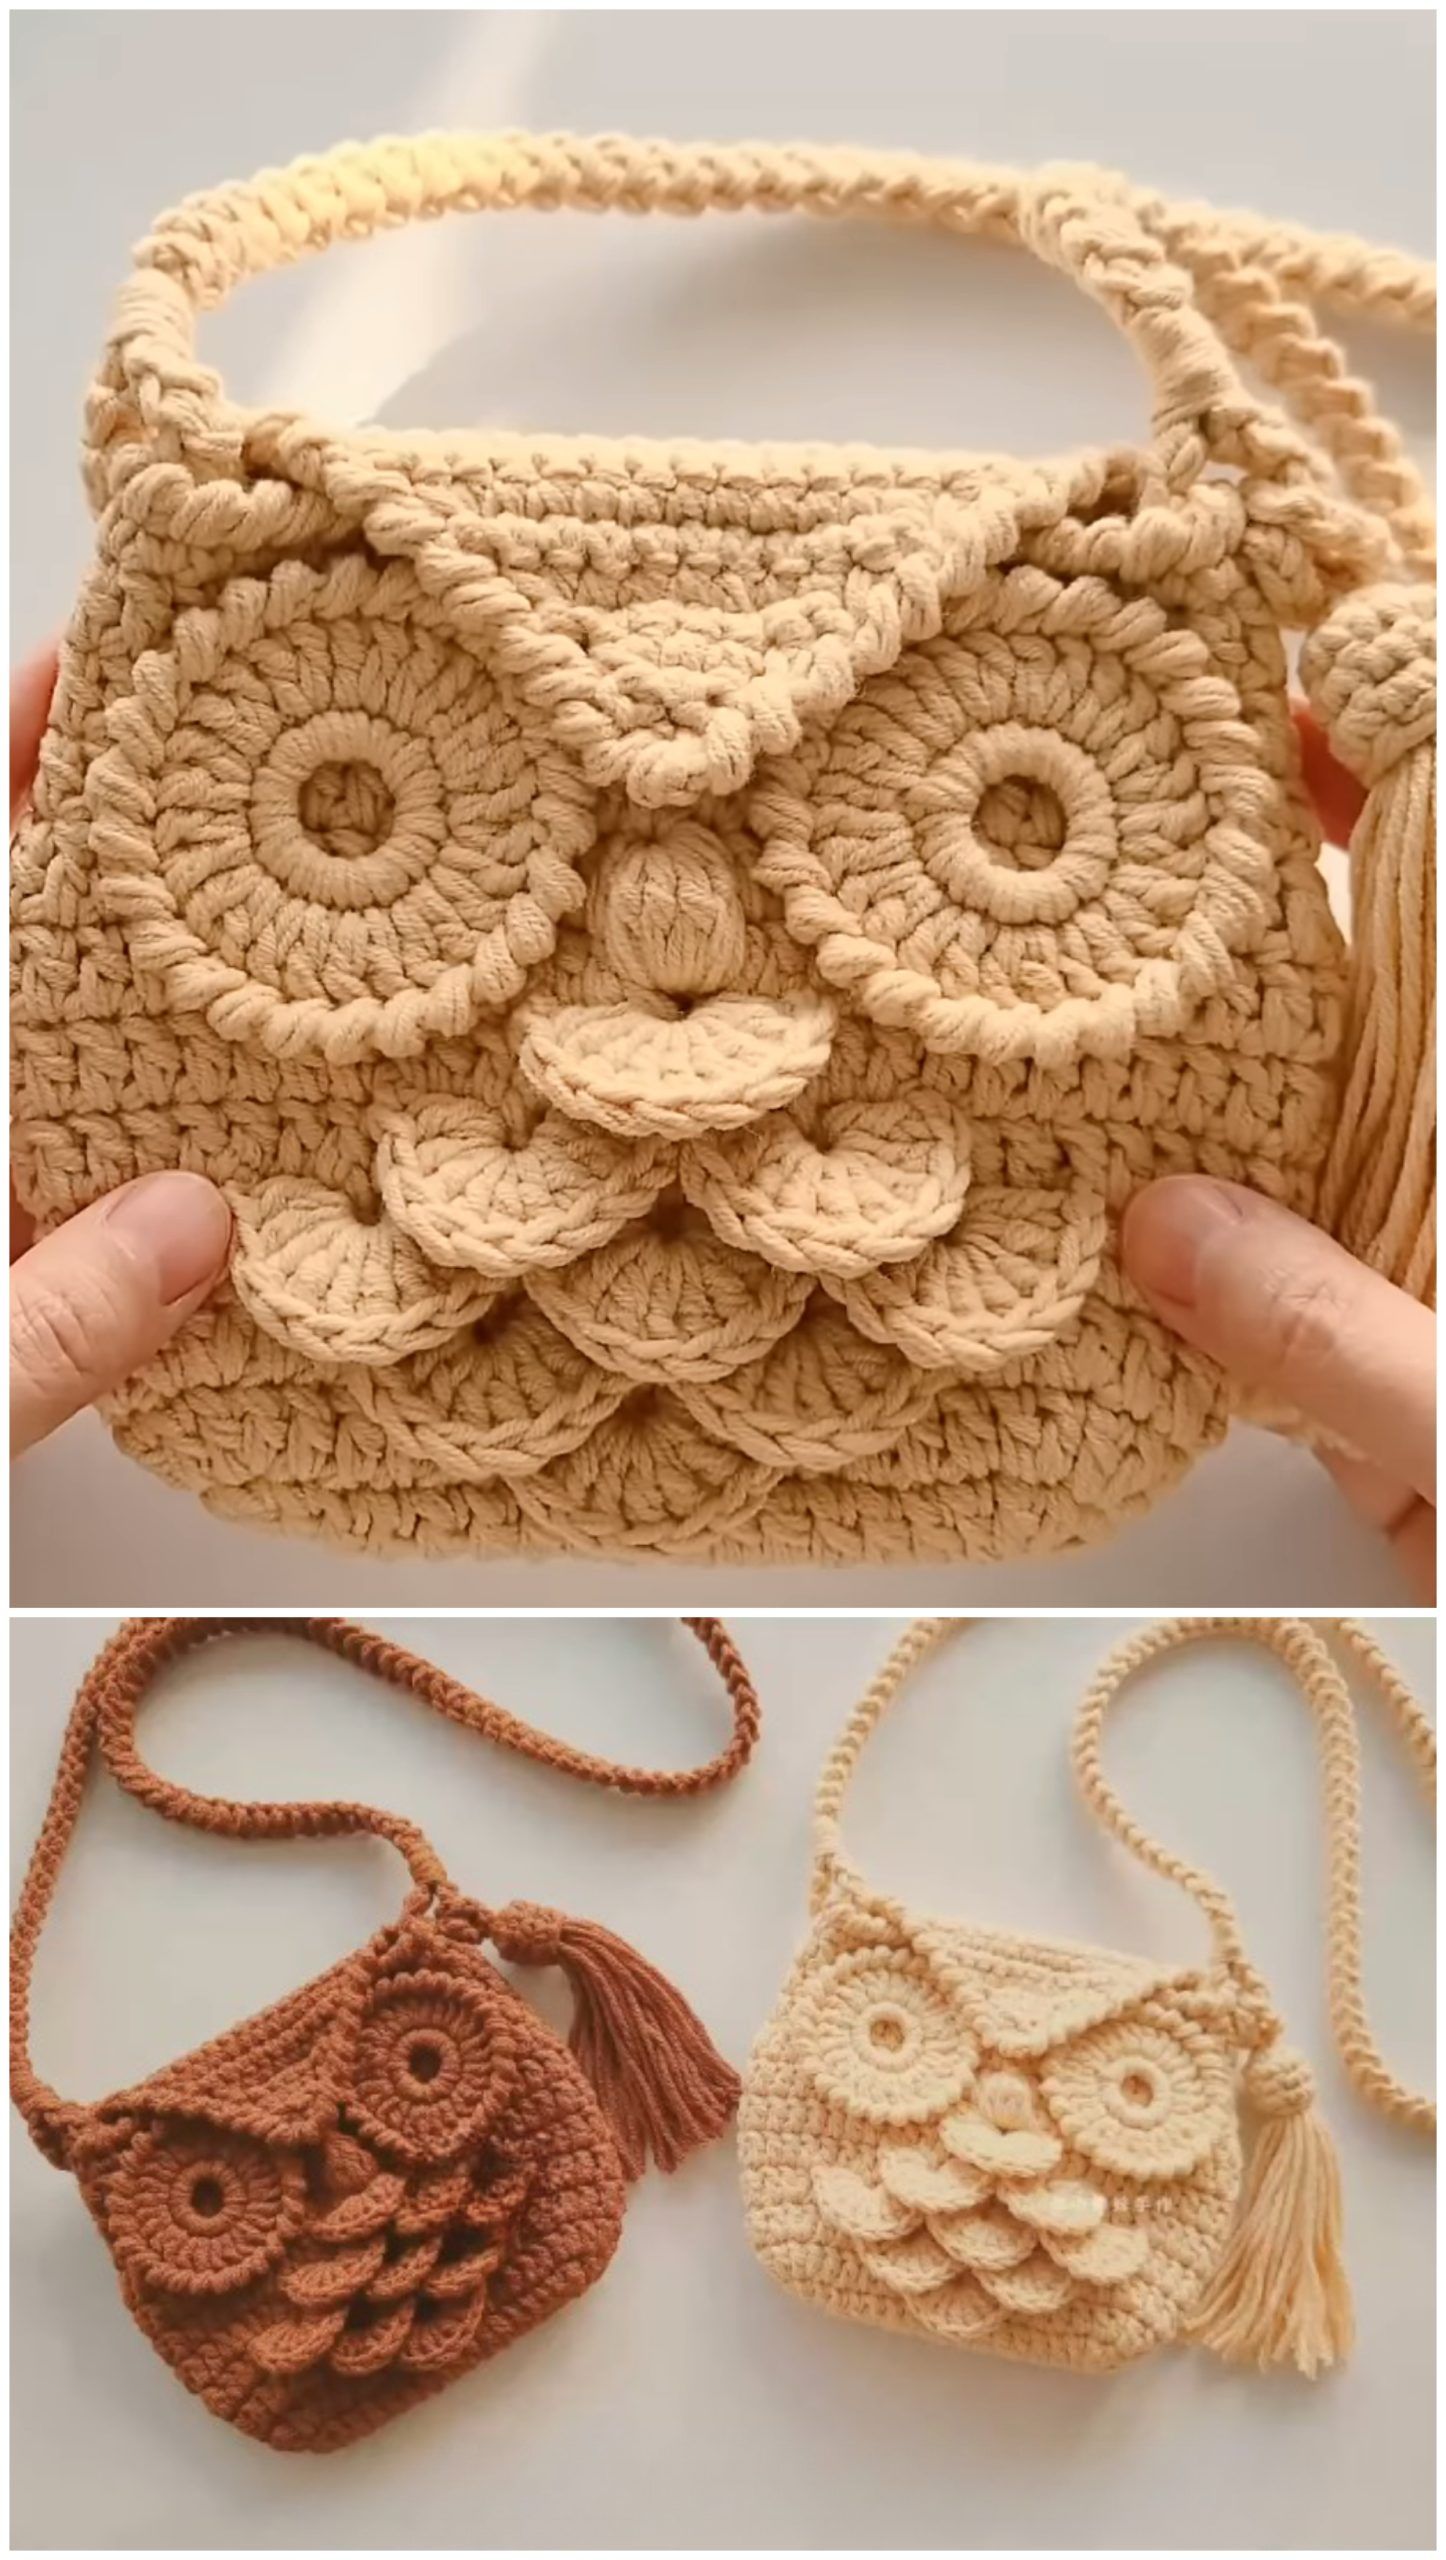 Gift Yourself A Crochet Purse On Your
Birthday